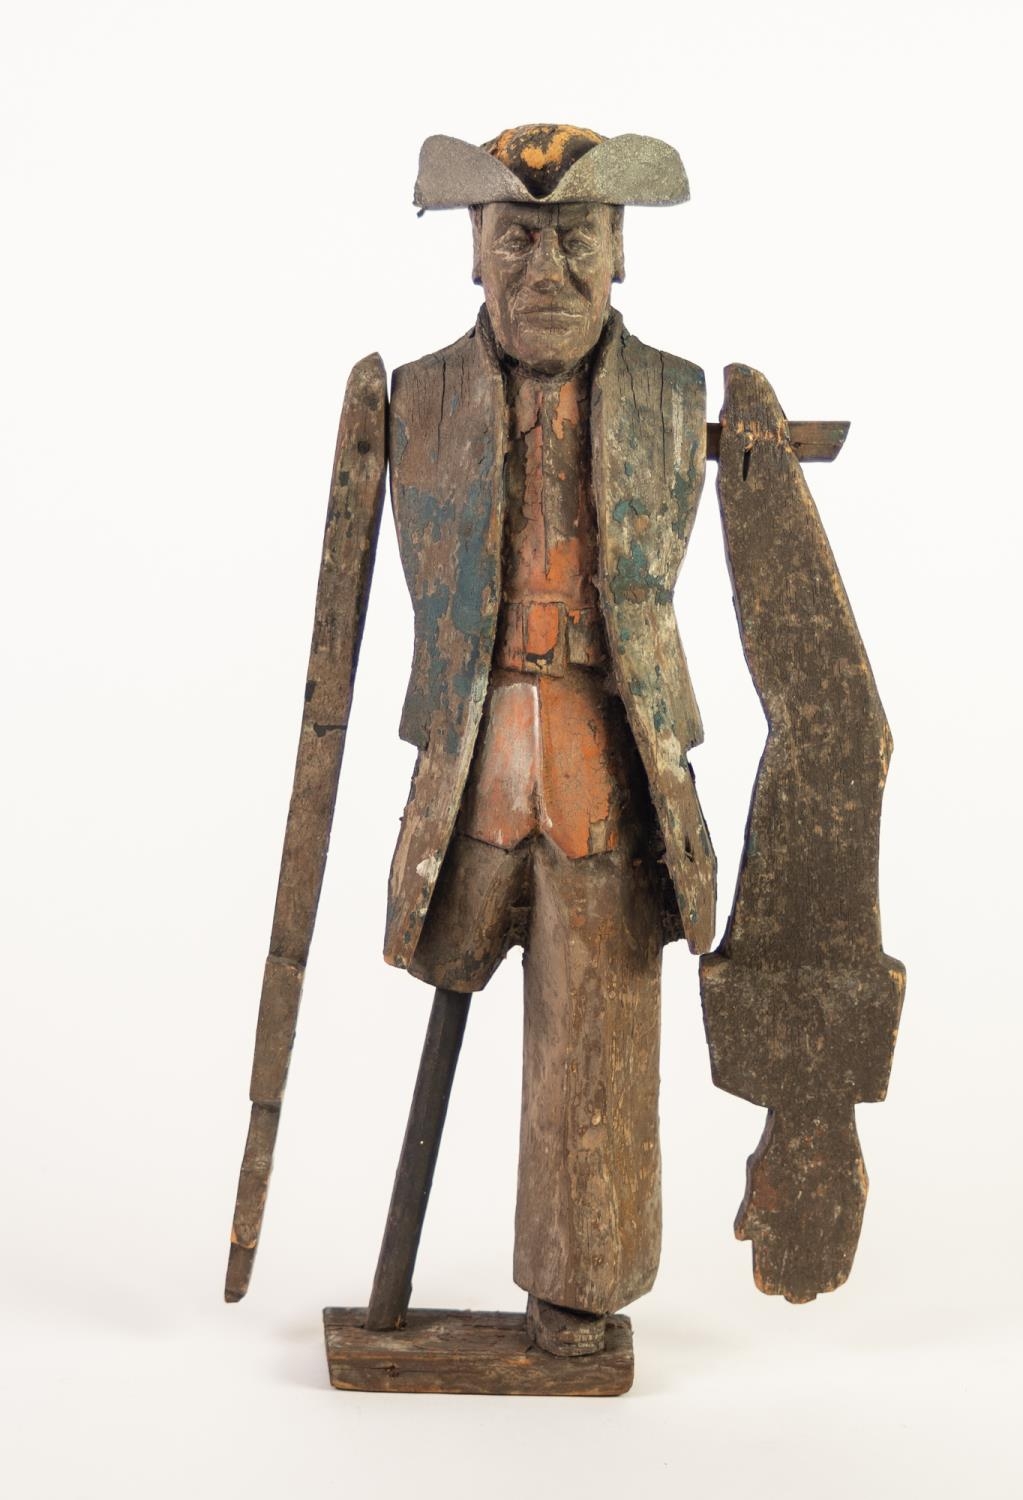 TWO 19th CENTURY WELL-CARVED AND COLD PAINTED PINE TARGET FIGURES, in the form of peg-legged - Image 2 of 2